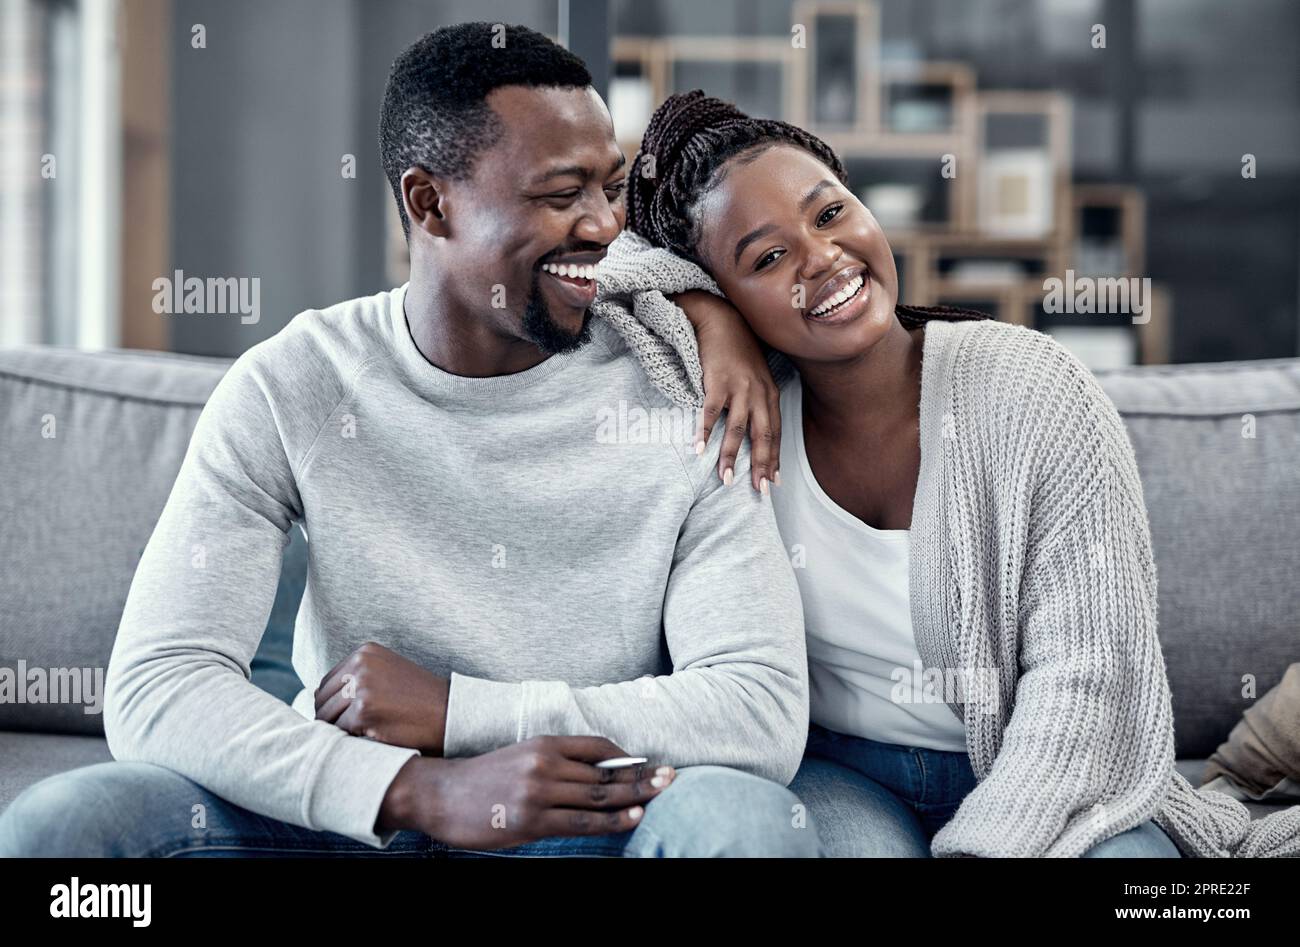 Happy, in love, and carefree couple relaxing, smiling and laughing together at home portrait while enjoying their weekend spent indoors. Young African wife and loving husband bonding on their couch Stock Photo